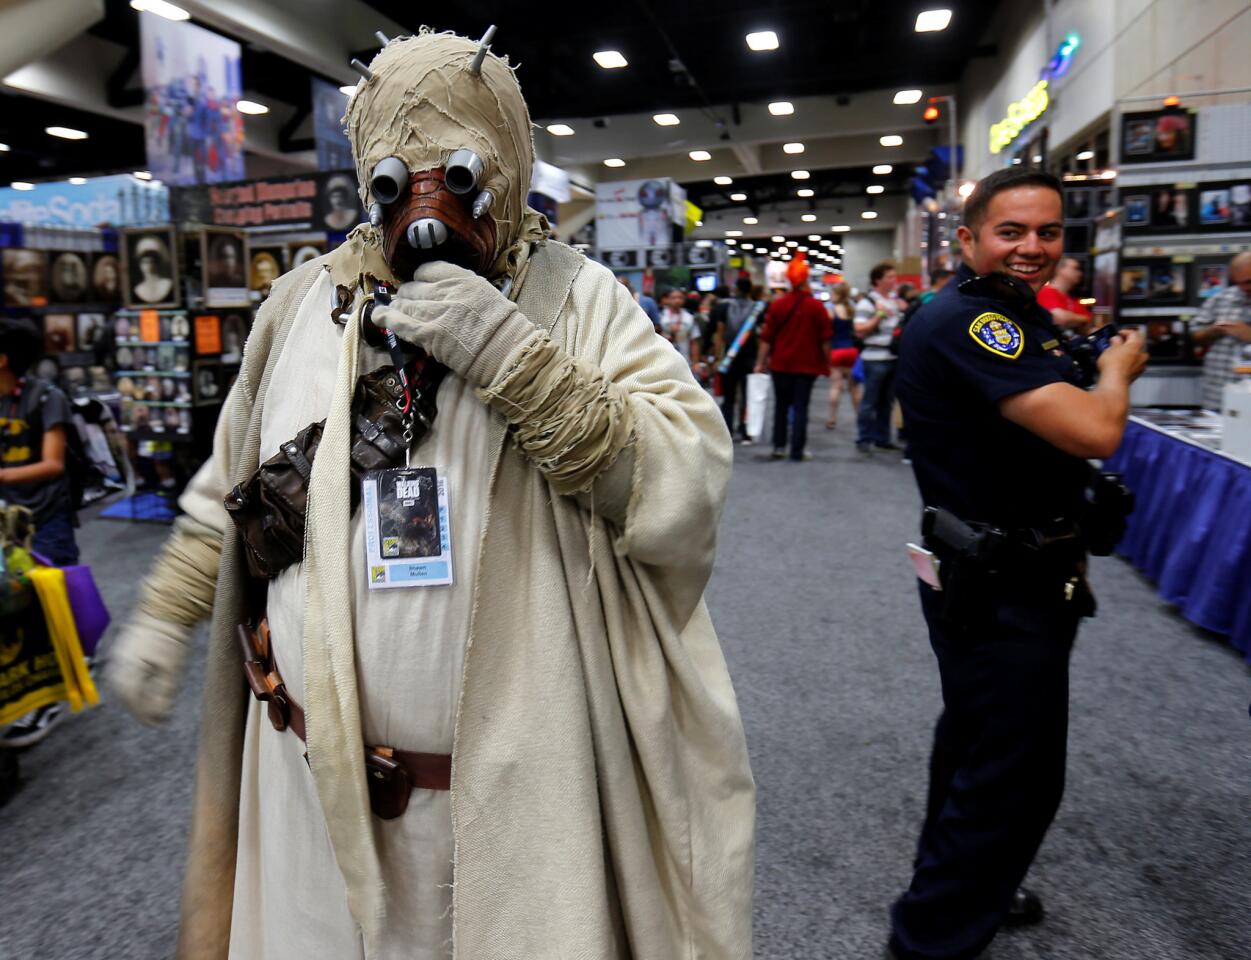 A San Diego police officer takes a second look at an attendee's Star Wars Tusken Raider costume while patrolling the convention floor during opening day of Comic-Con International in San Diego